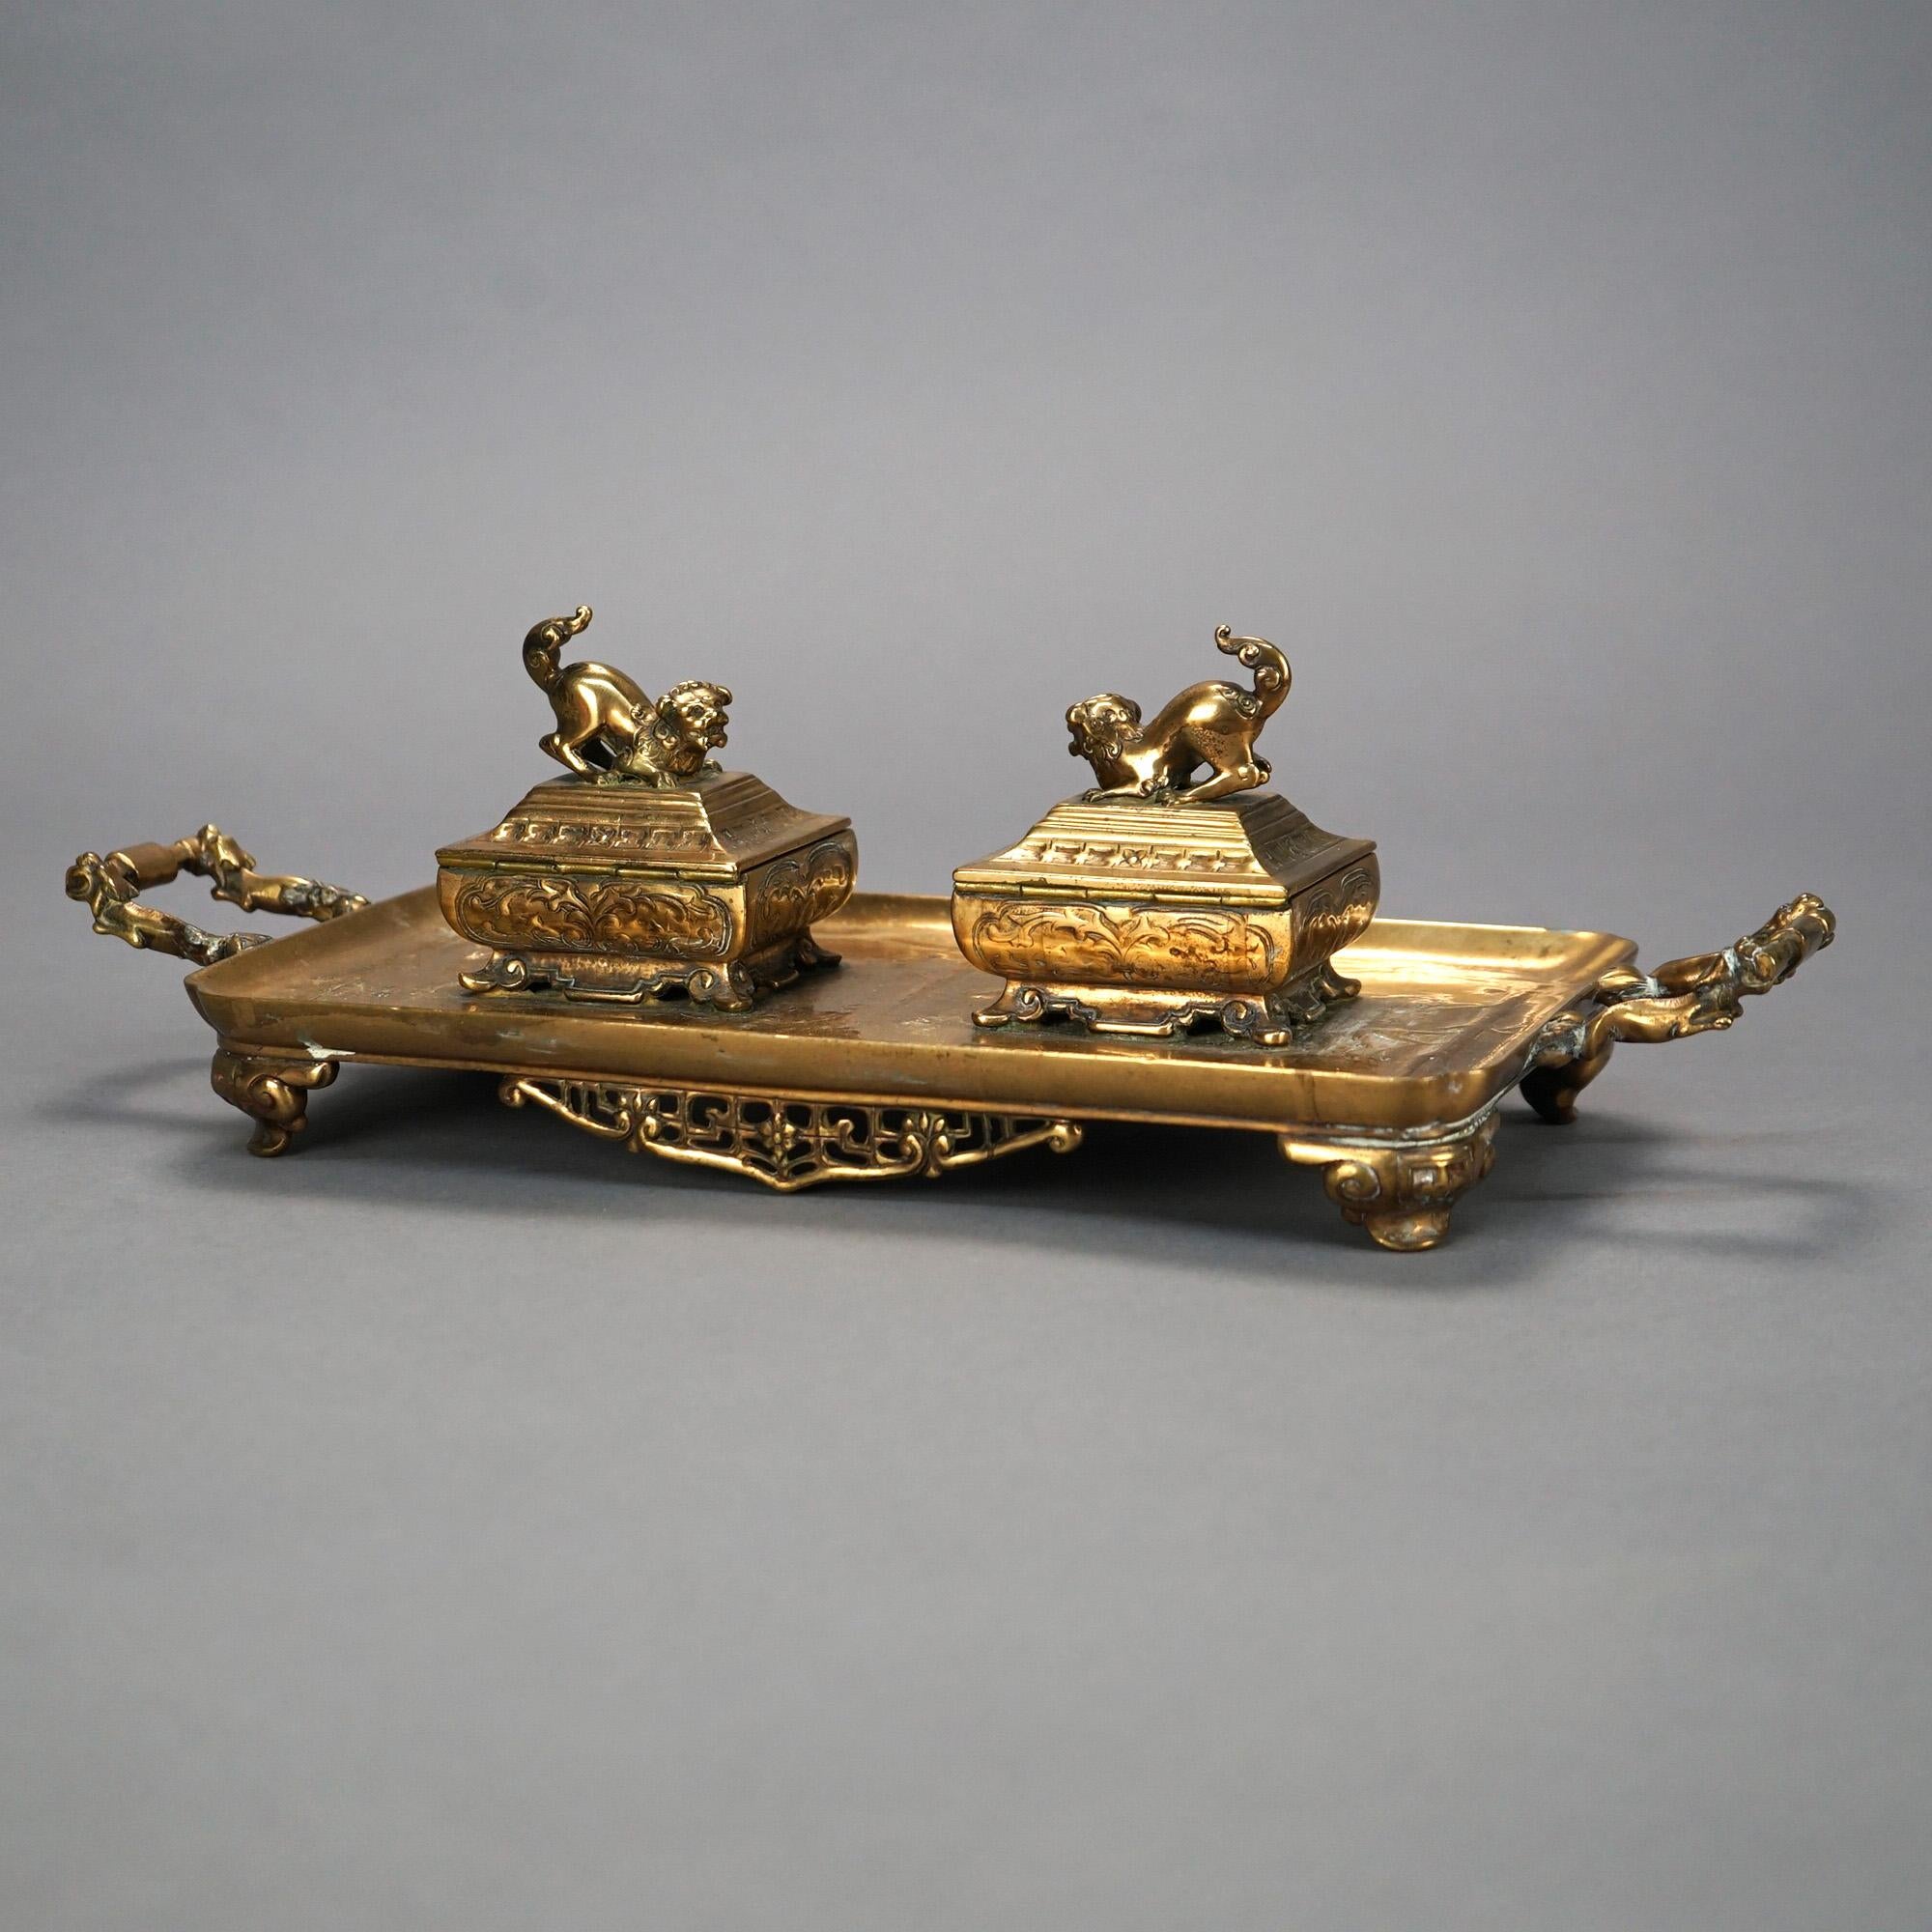 An antique Henry Dasson figural Orientalist inkwell set offers gilt bronze construction with two inkwells, each having foo dog finials, seated on a footed tray, c1910

Measures- 4.5'' H x 15.5'' W x 5.75'' D.